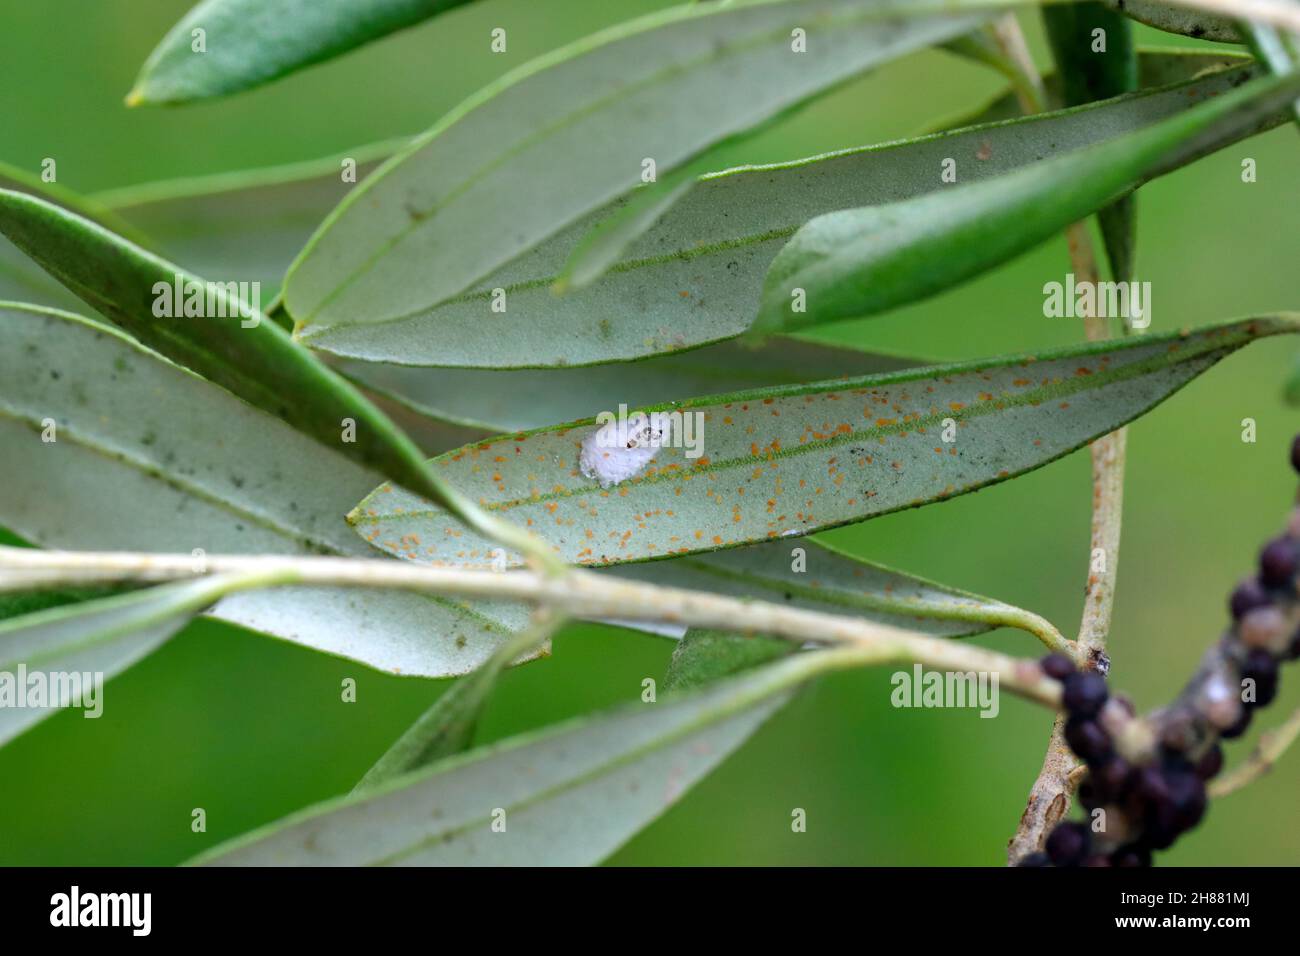 Long-tailed mealybug (Pseudococcus longispinus) on an olive leaf. White cotton secreted by the female hides the eggs. Stock Photo